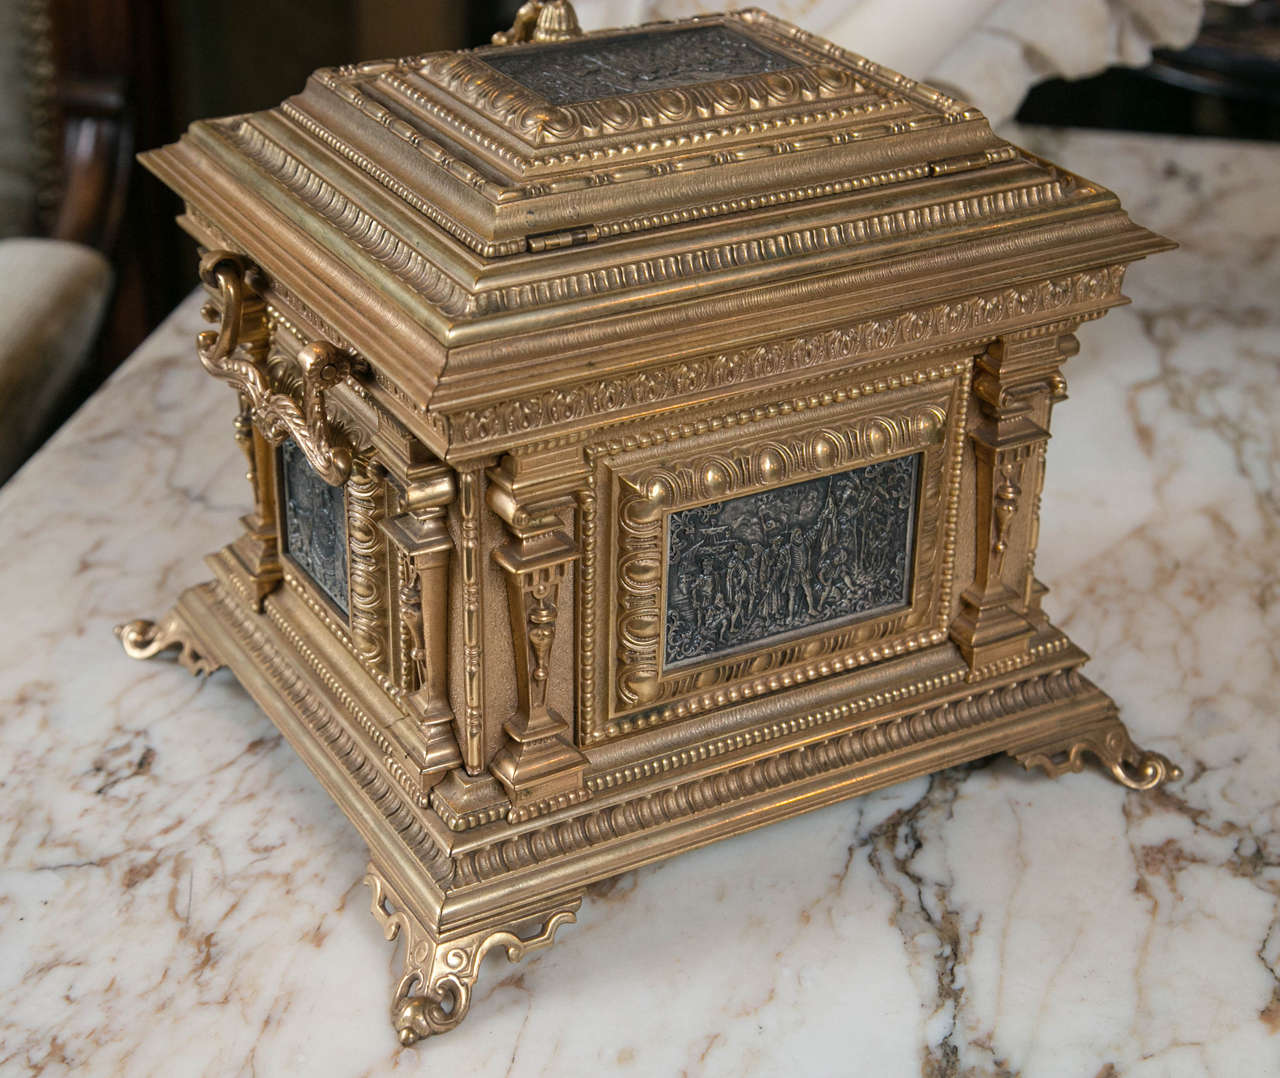 A very unusual casket form jewelry or trinket box, with lift top. It is lined in dark blue velvet. There is no lock and never had one. Tassel handle in bronze on lid..The  sides have  bale handles. On the top, front and back are what appear to be